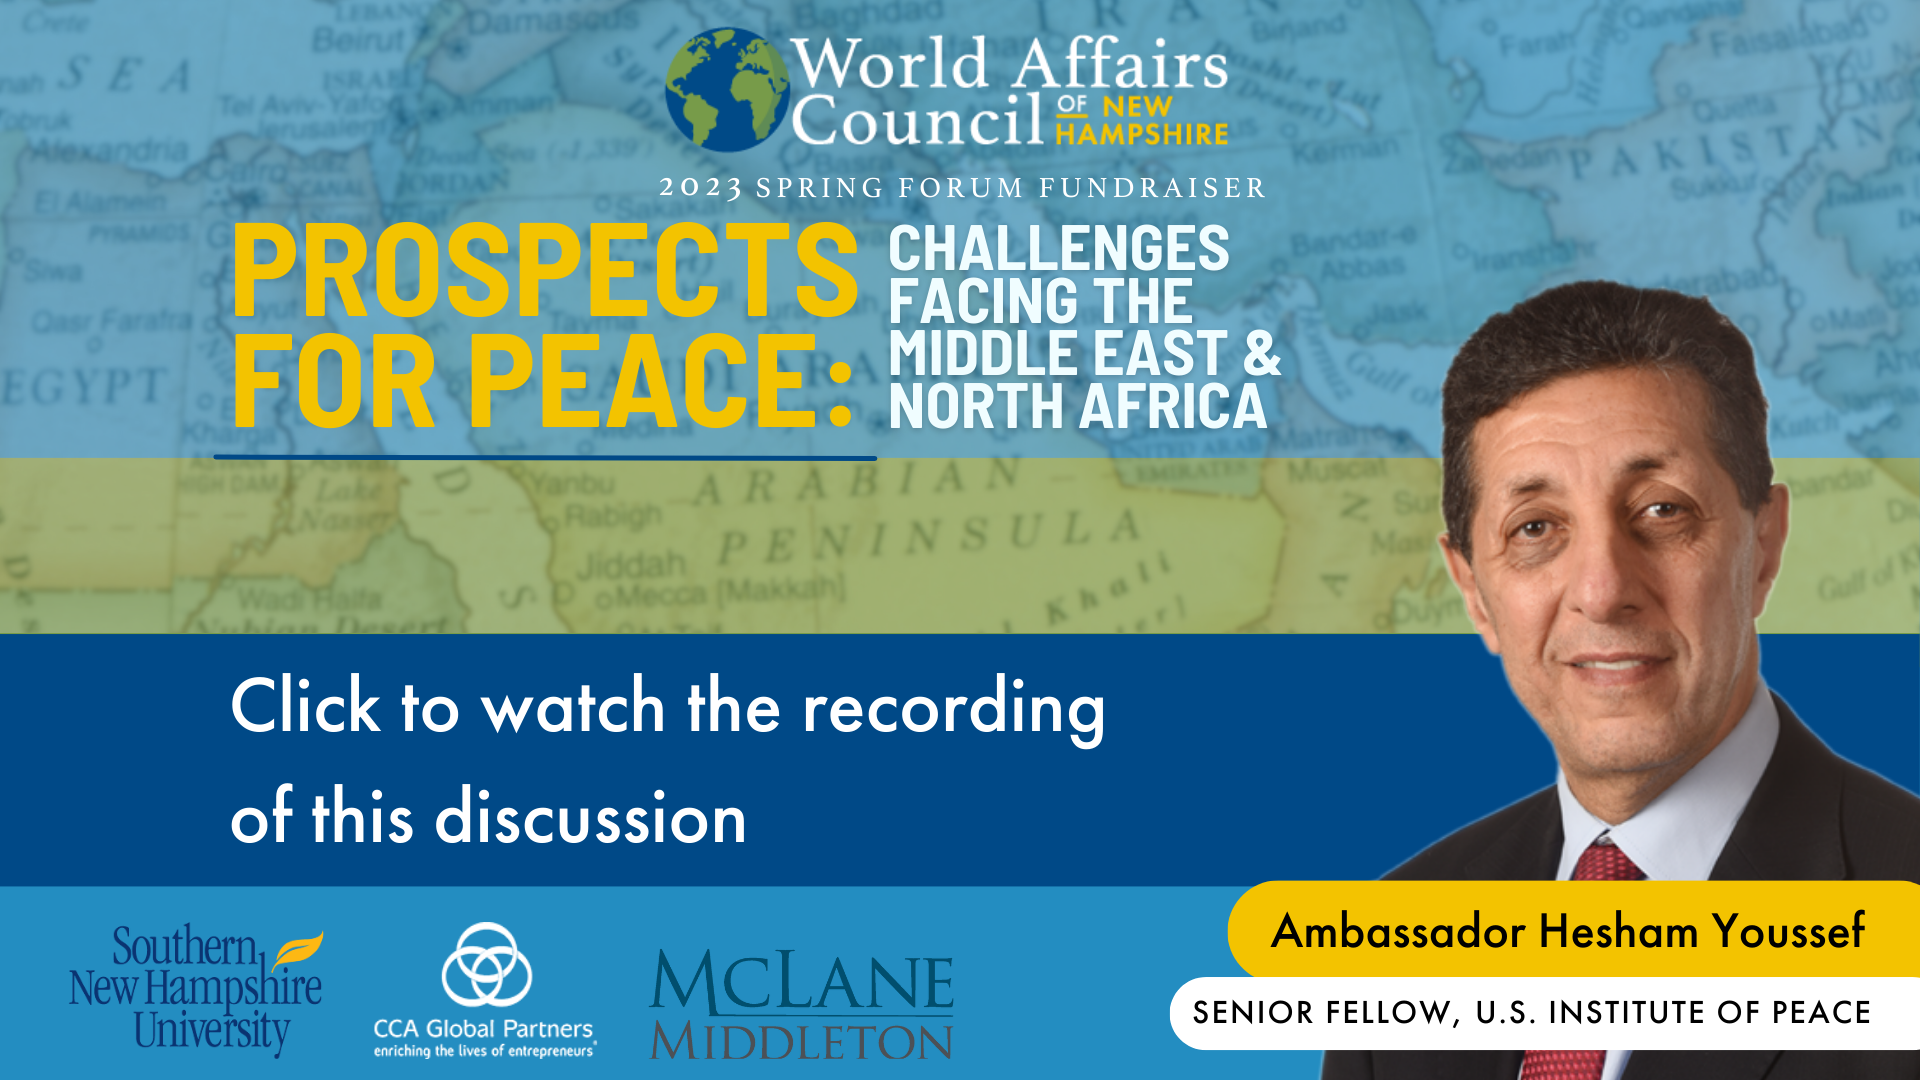 Prospects for Peace: Challenges Facing the Middle East and North Africa